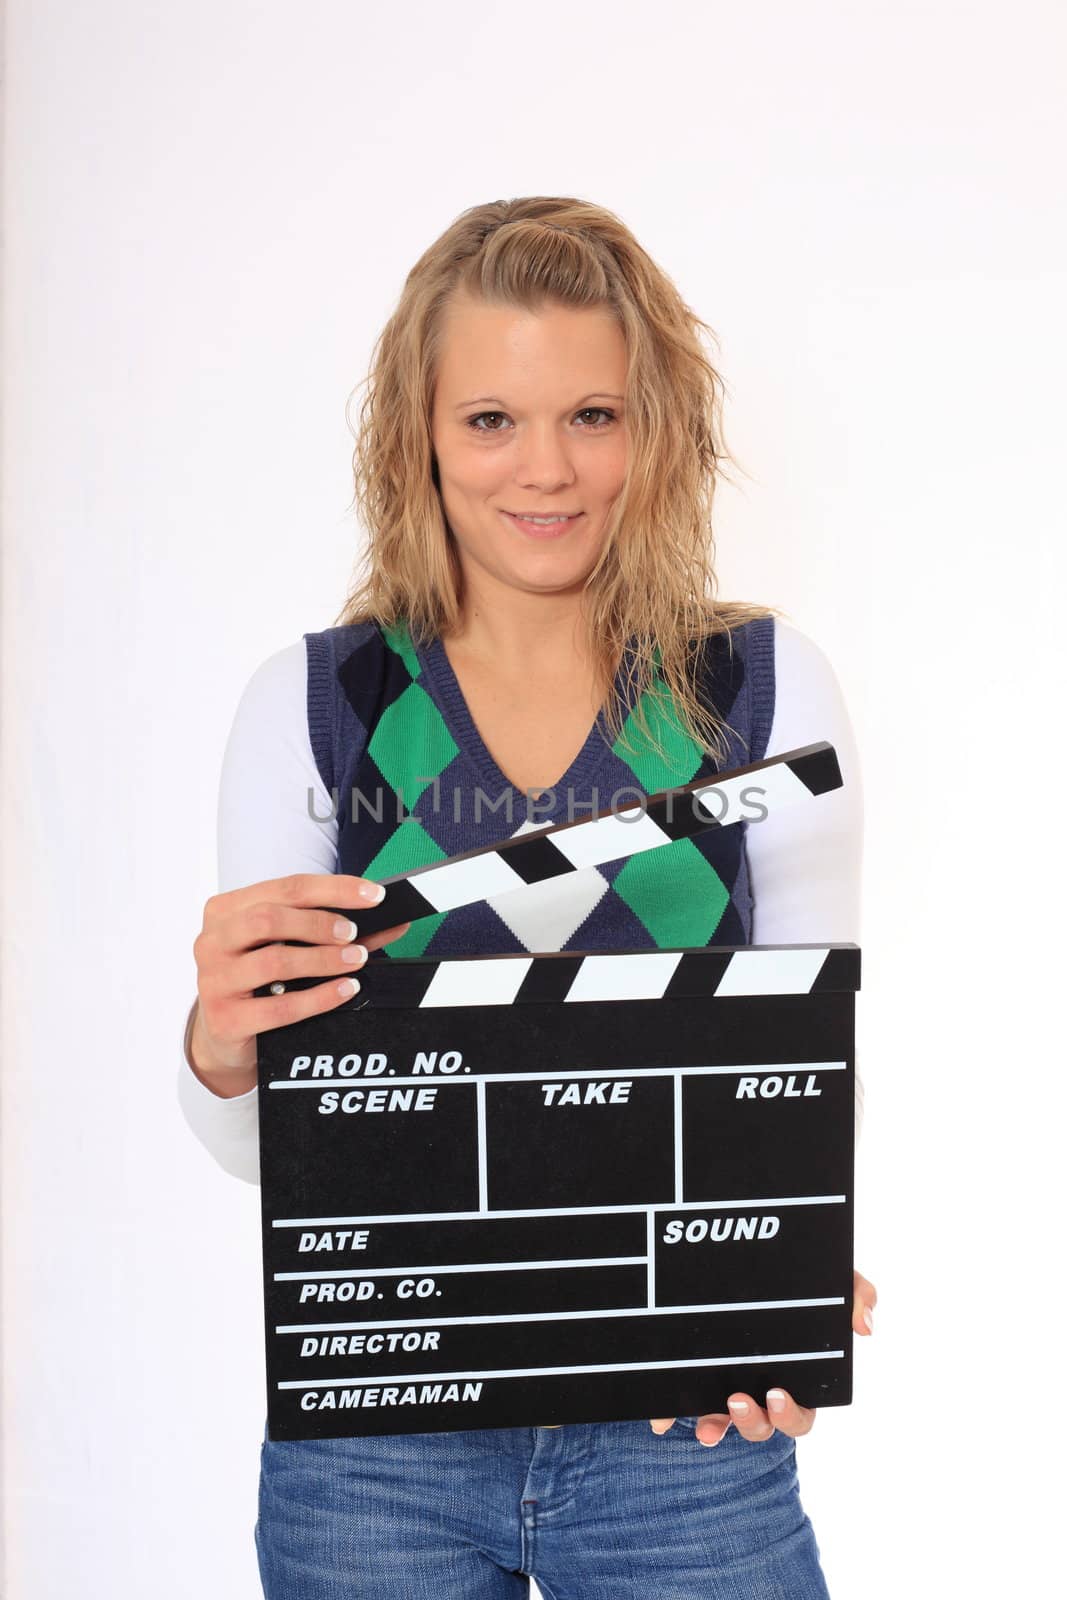 Attractive young woman holding a slate. All on white background.